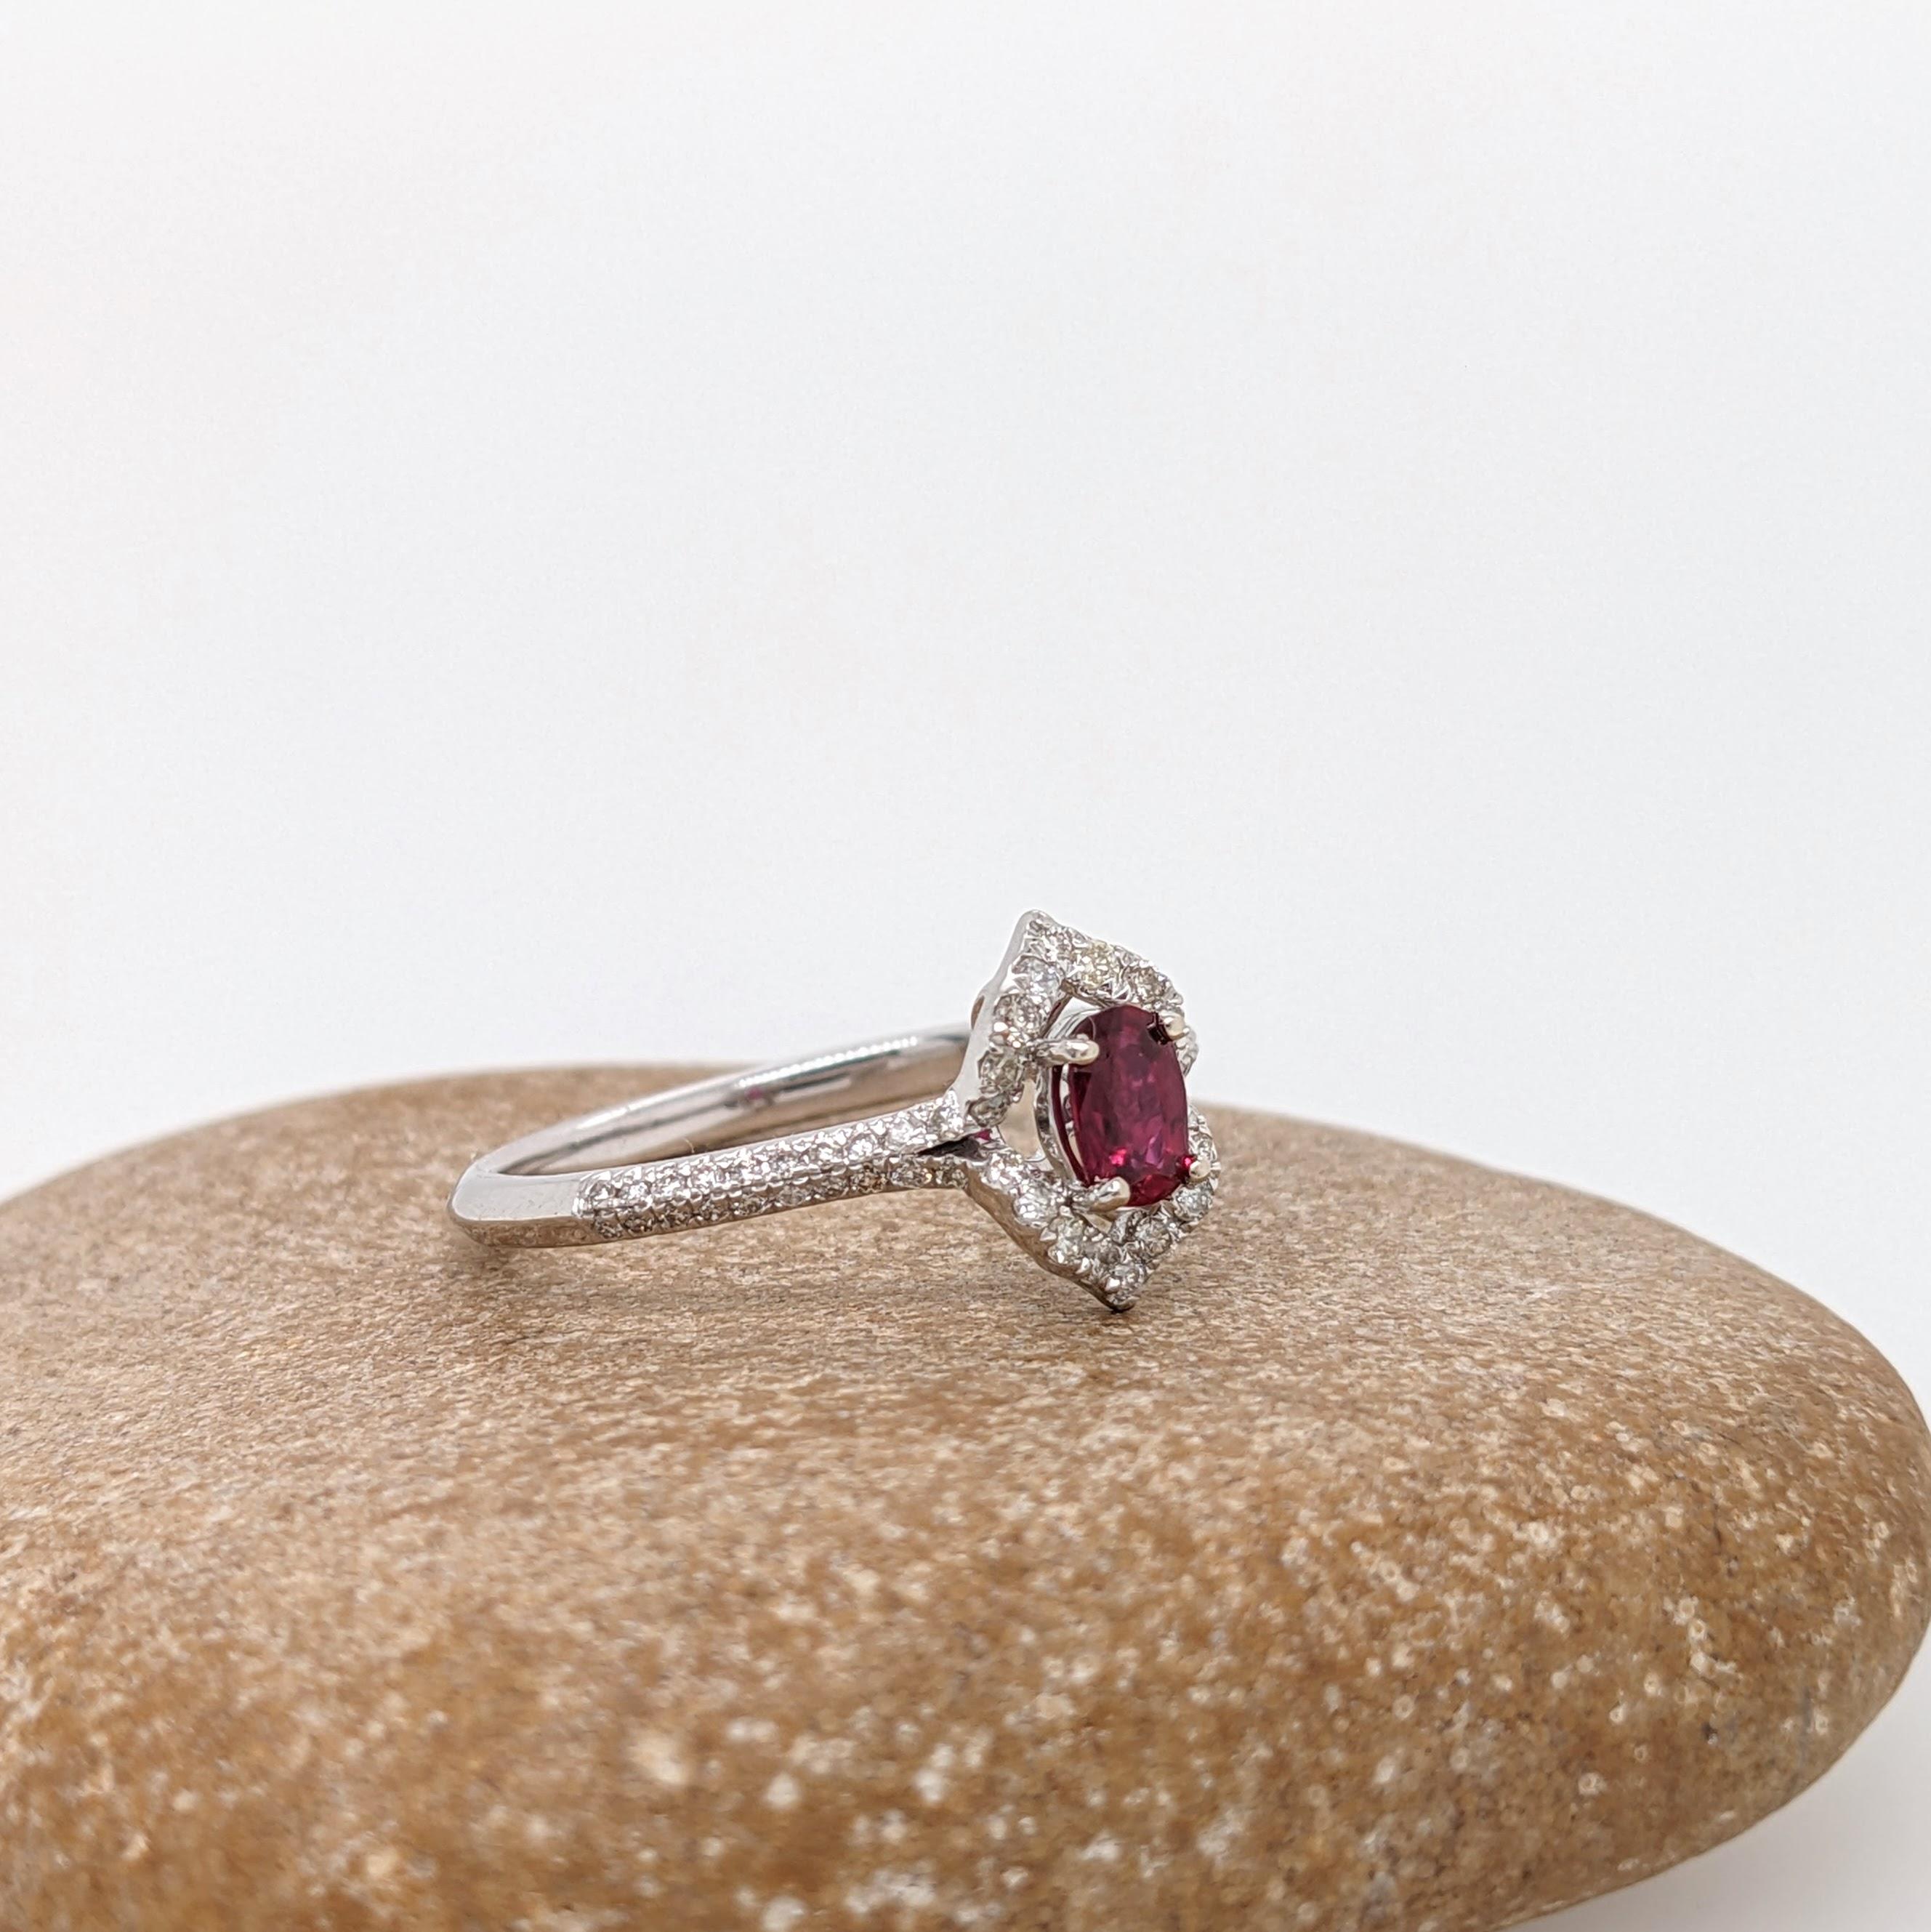 Women's Vintage Inspired Ruby Ring w Diamond Halo in 14K White Gold Oval 5x3.5mm